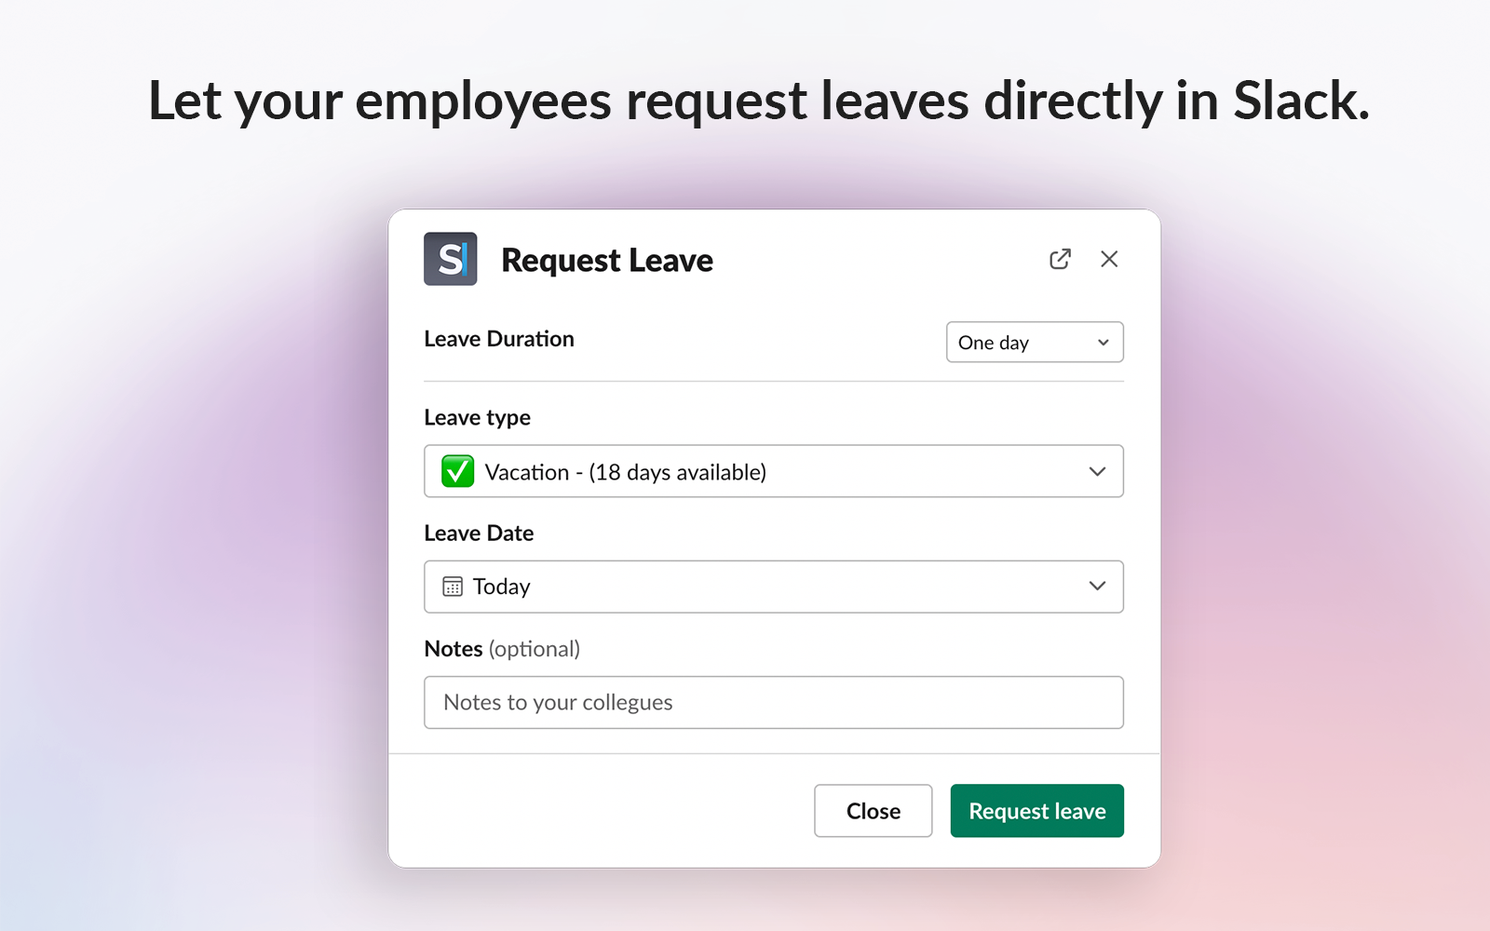 Spock Request Leave directly in Slack